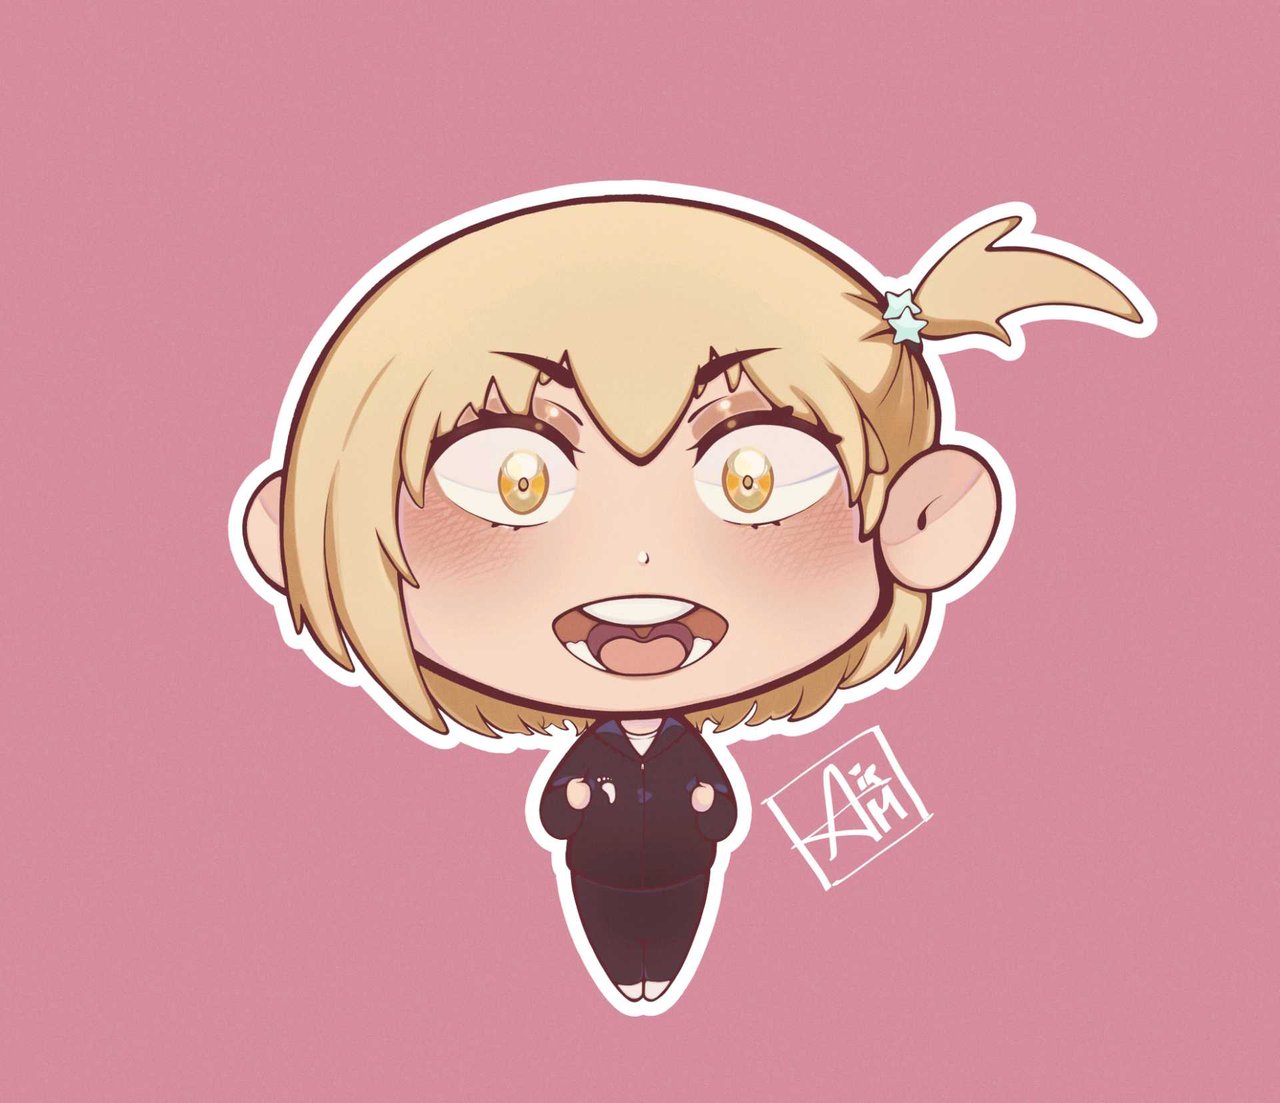 Chibi is the perfect anime style, cute, easier to draw and cheaper